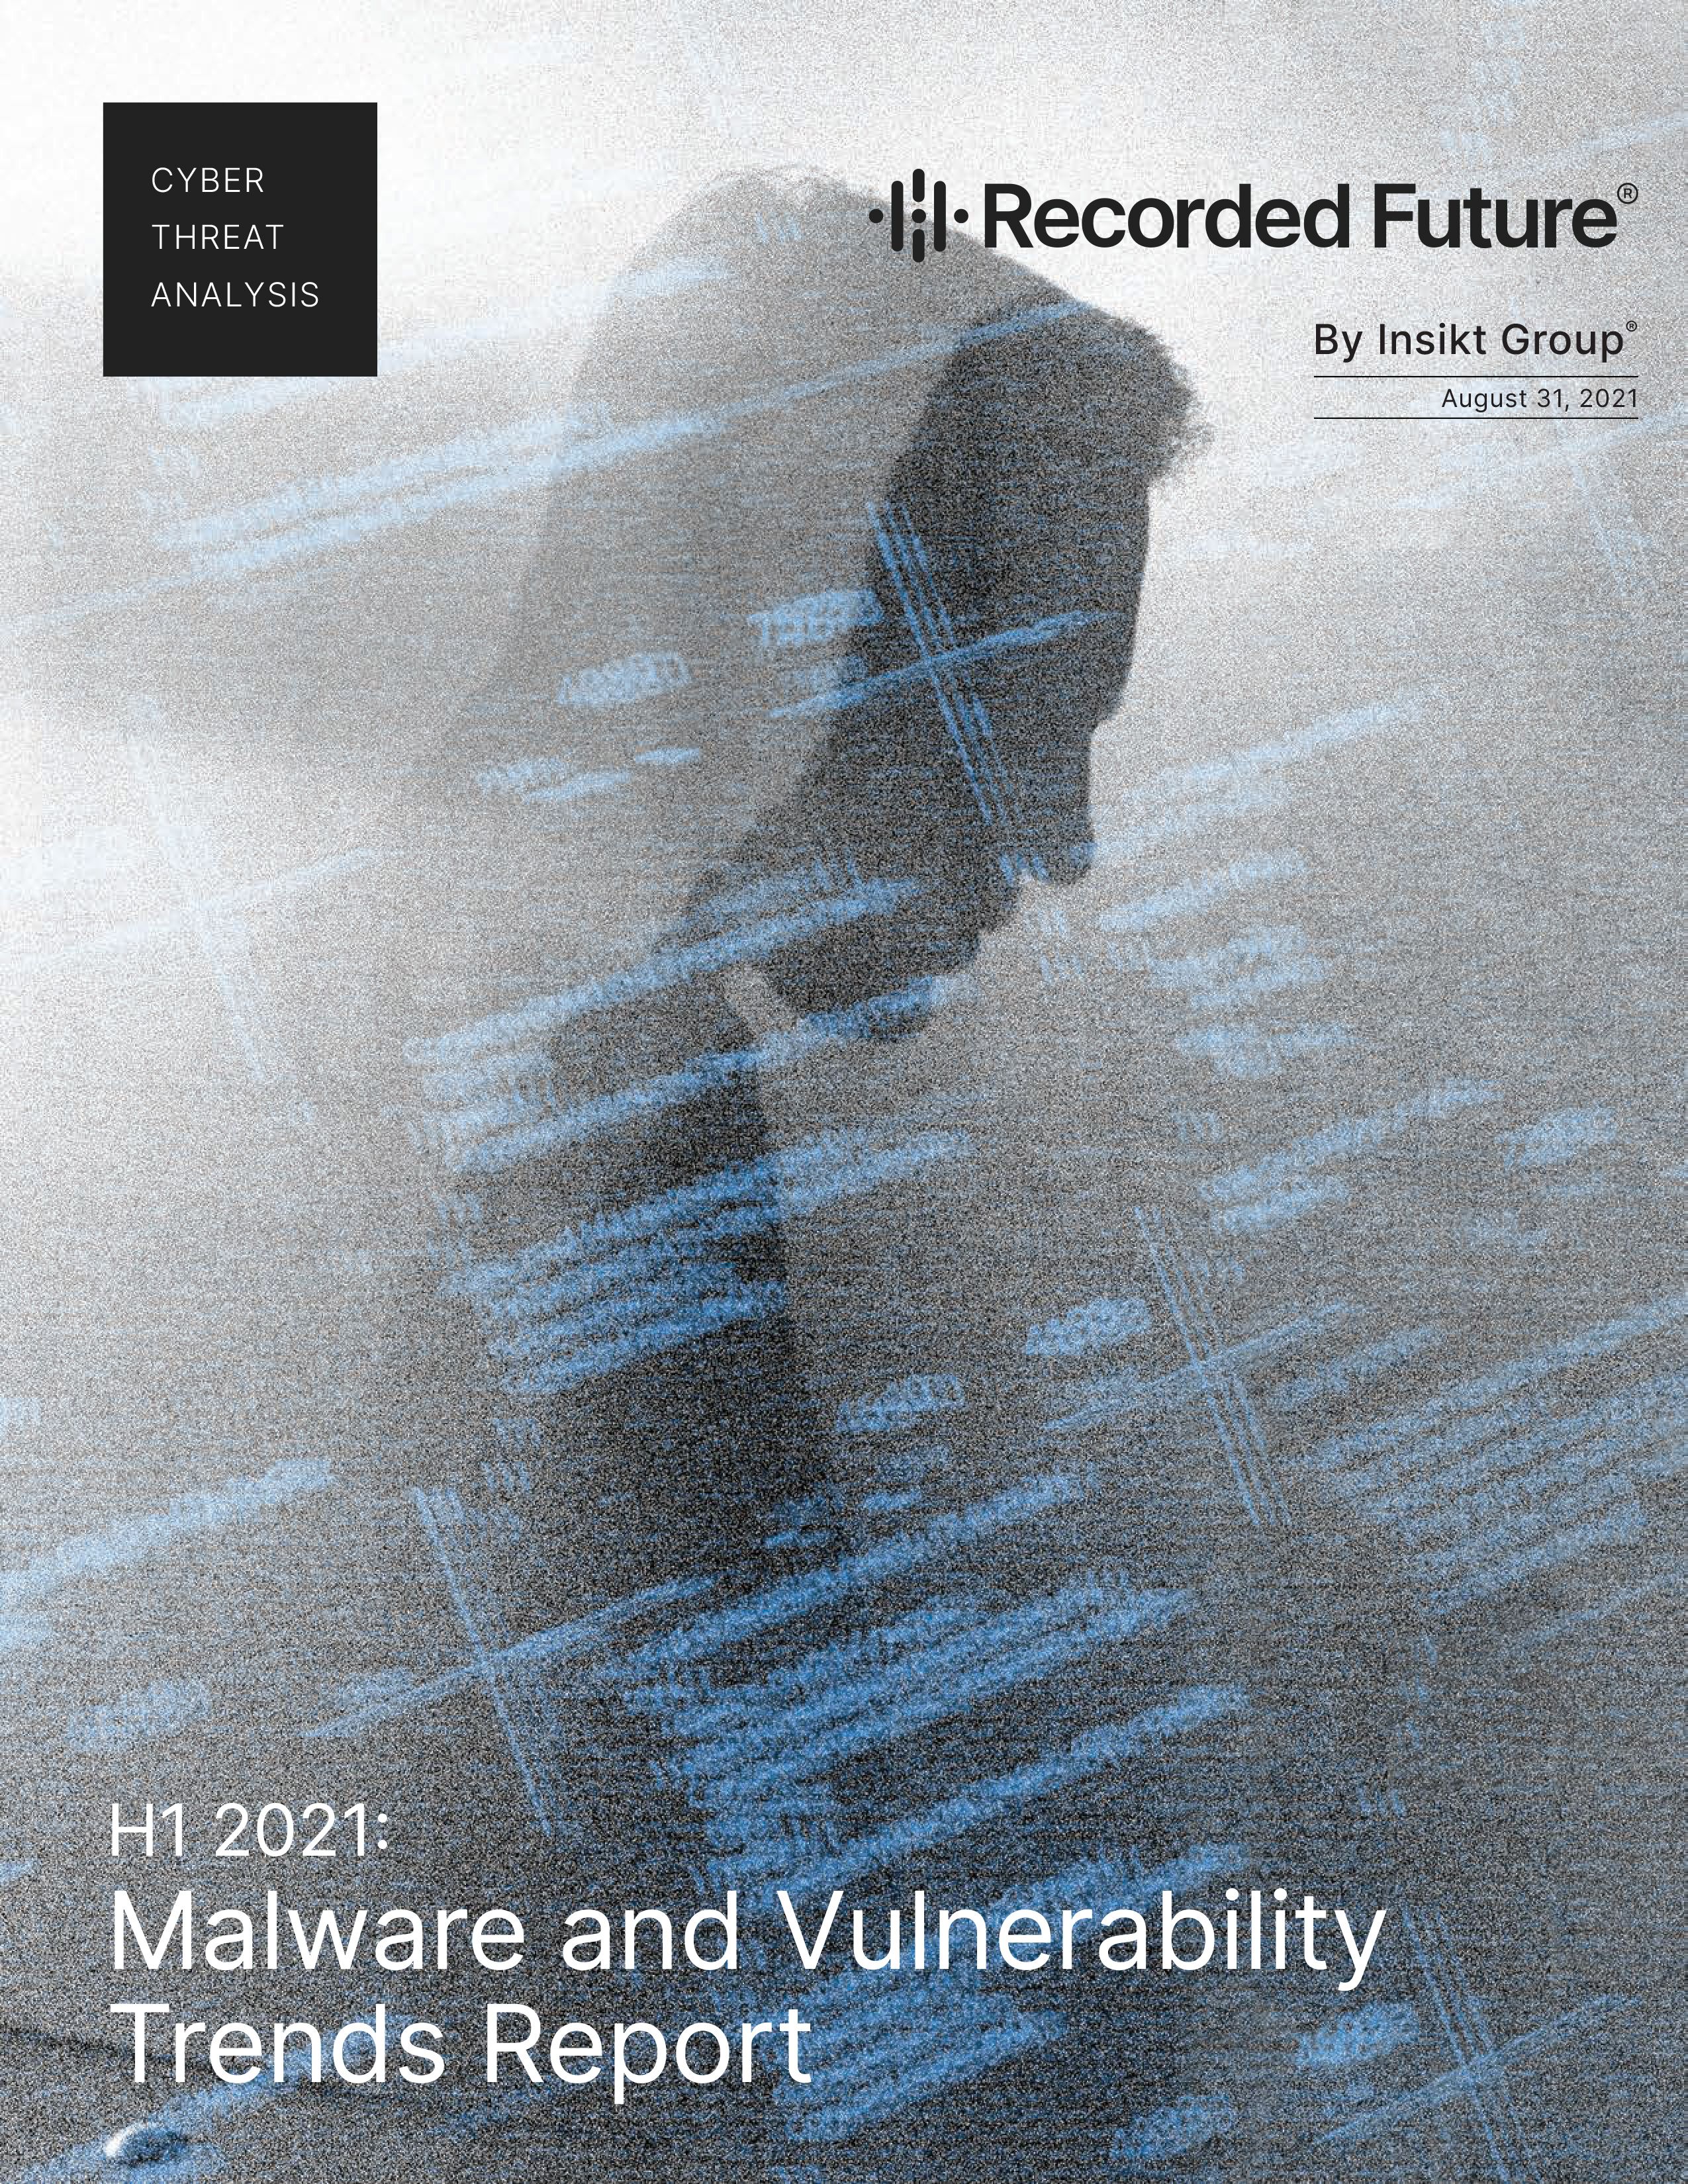 H1 2021: Malware and Vulnerability Trends Report